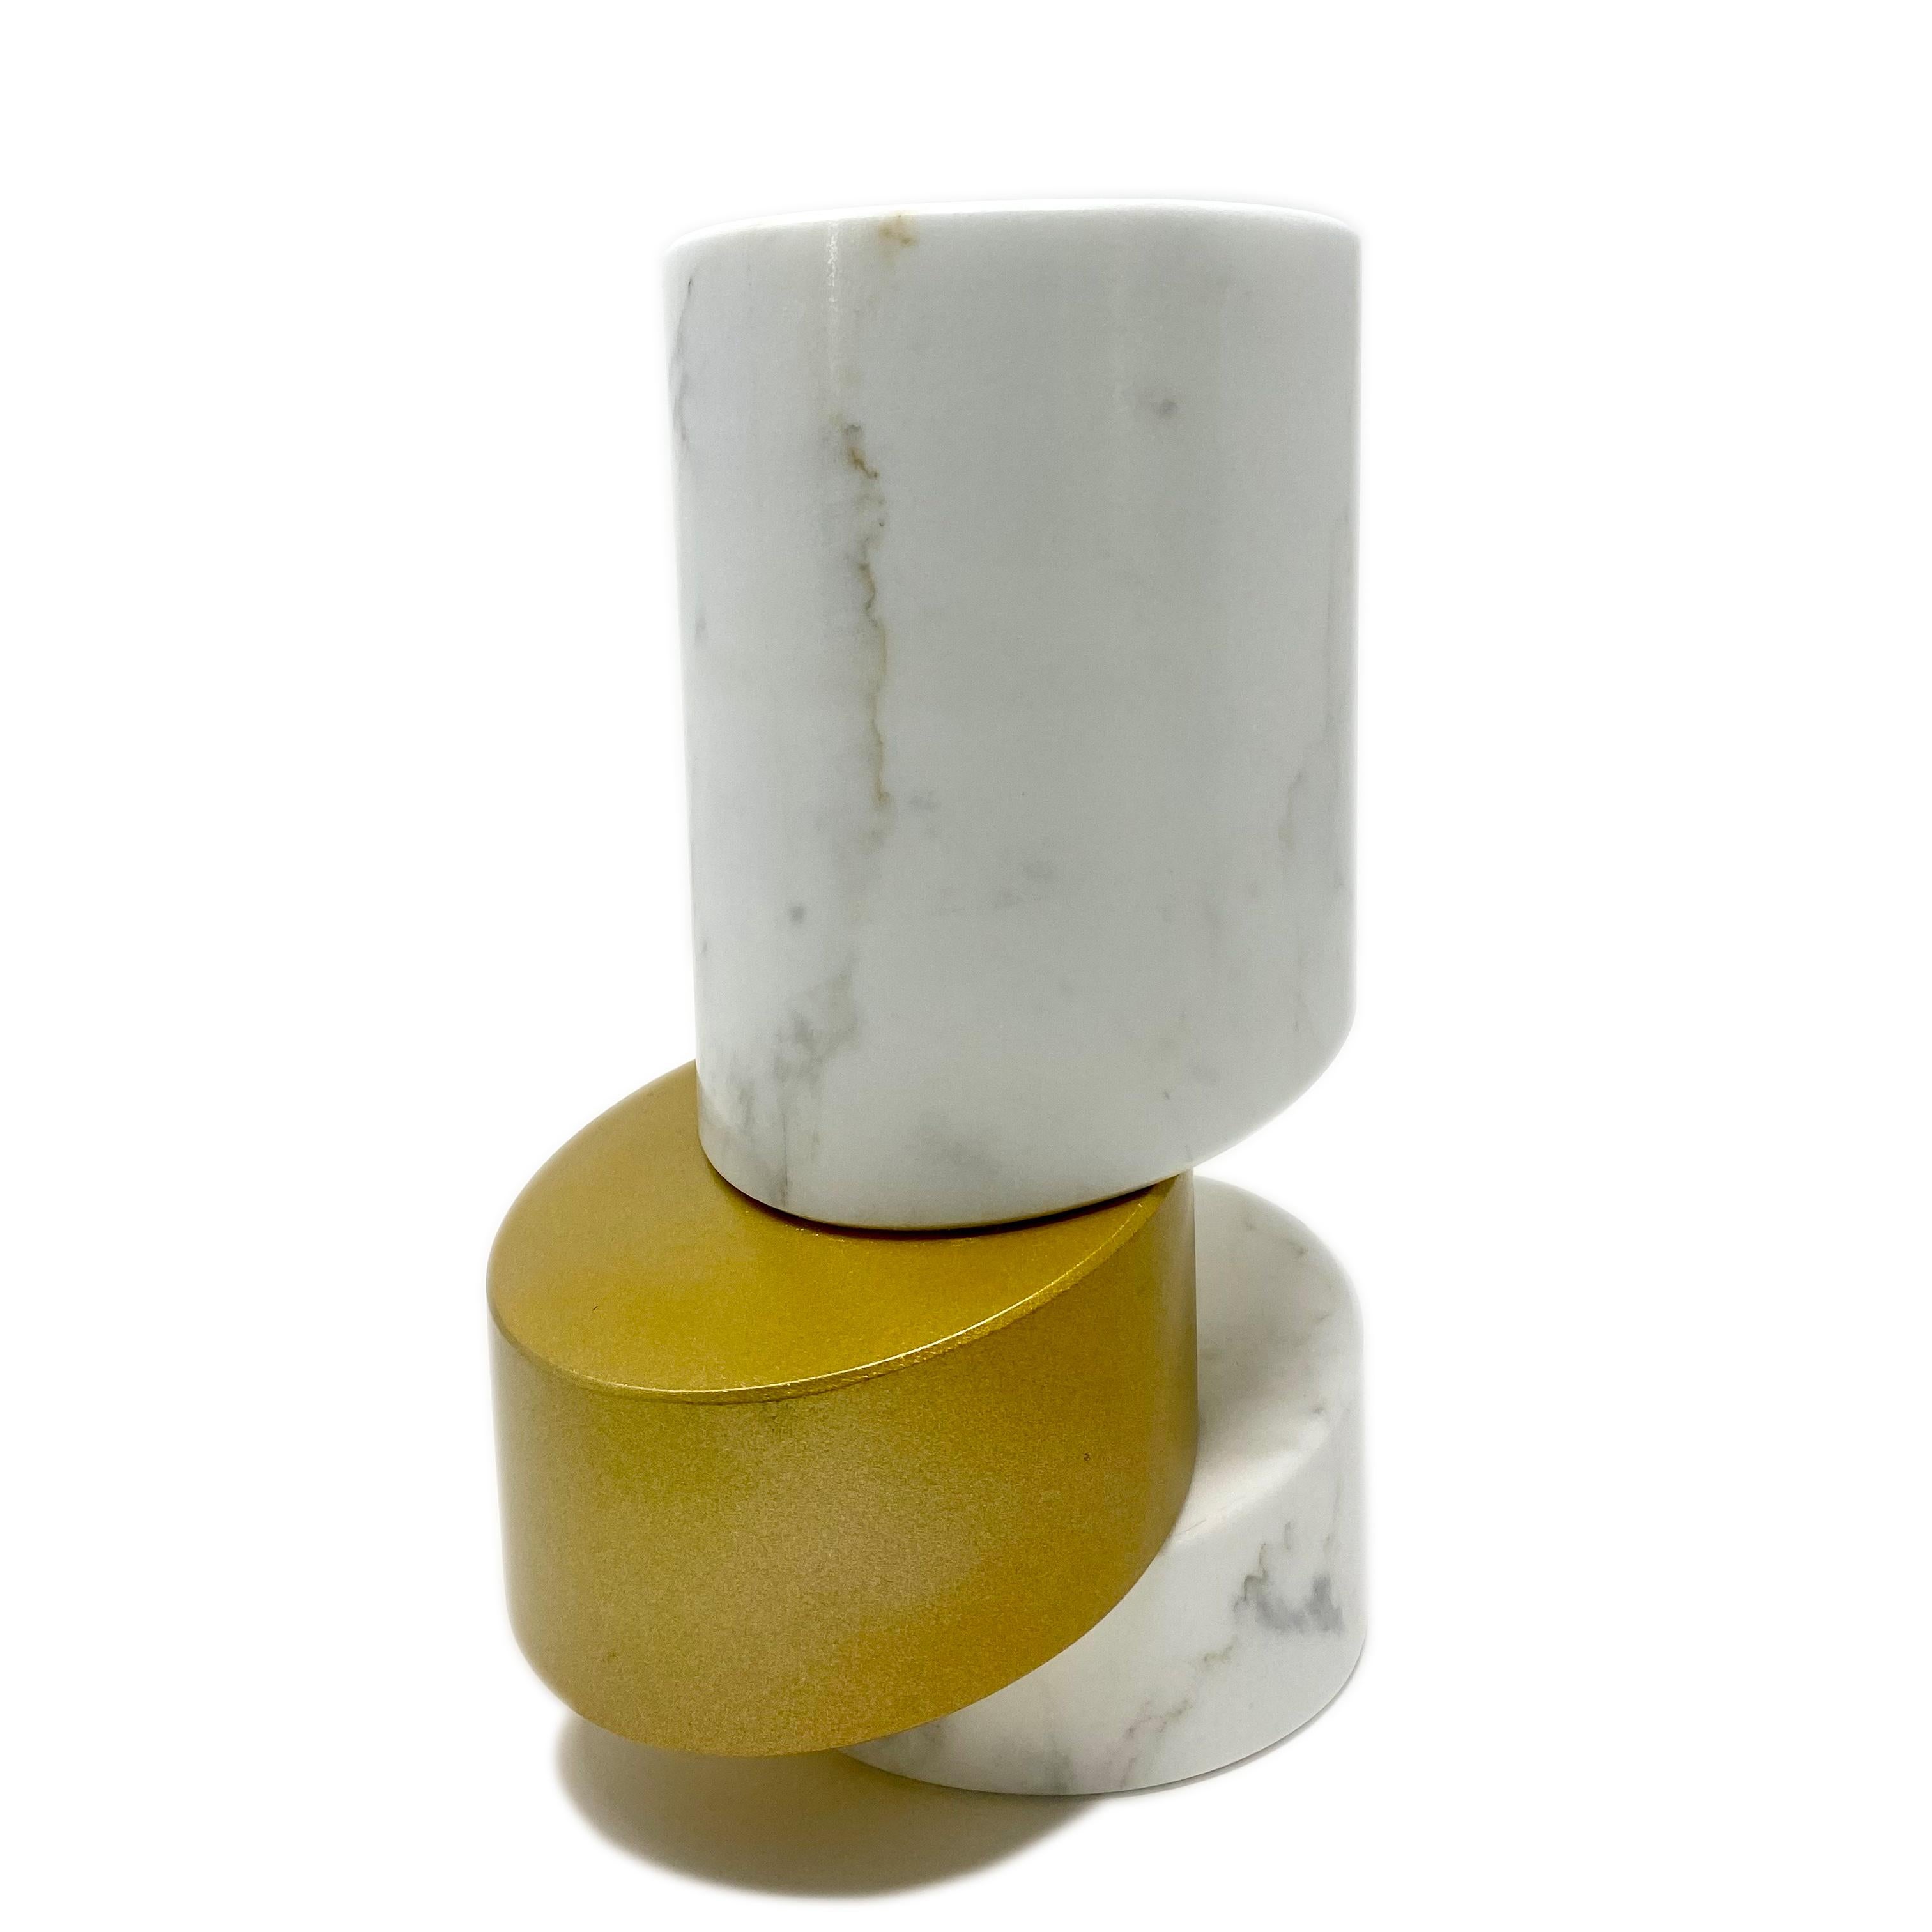 The Brass Vase, entirely made of marble, is an exclusive vase in Calacatta Oro composed of three blocks of marble placed one above the other in an asymmetrical way. The central section is embellished with a gold finish, giving the Brass vase an